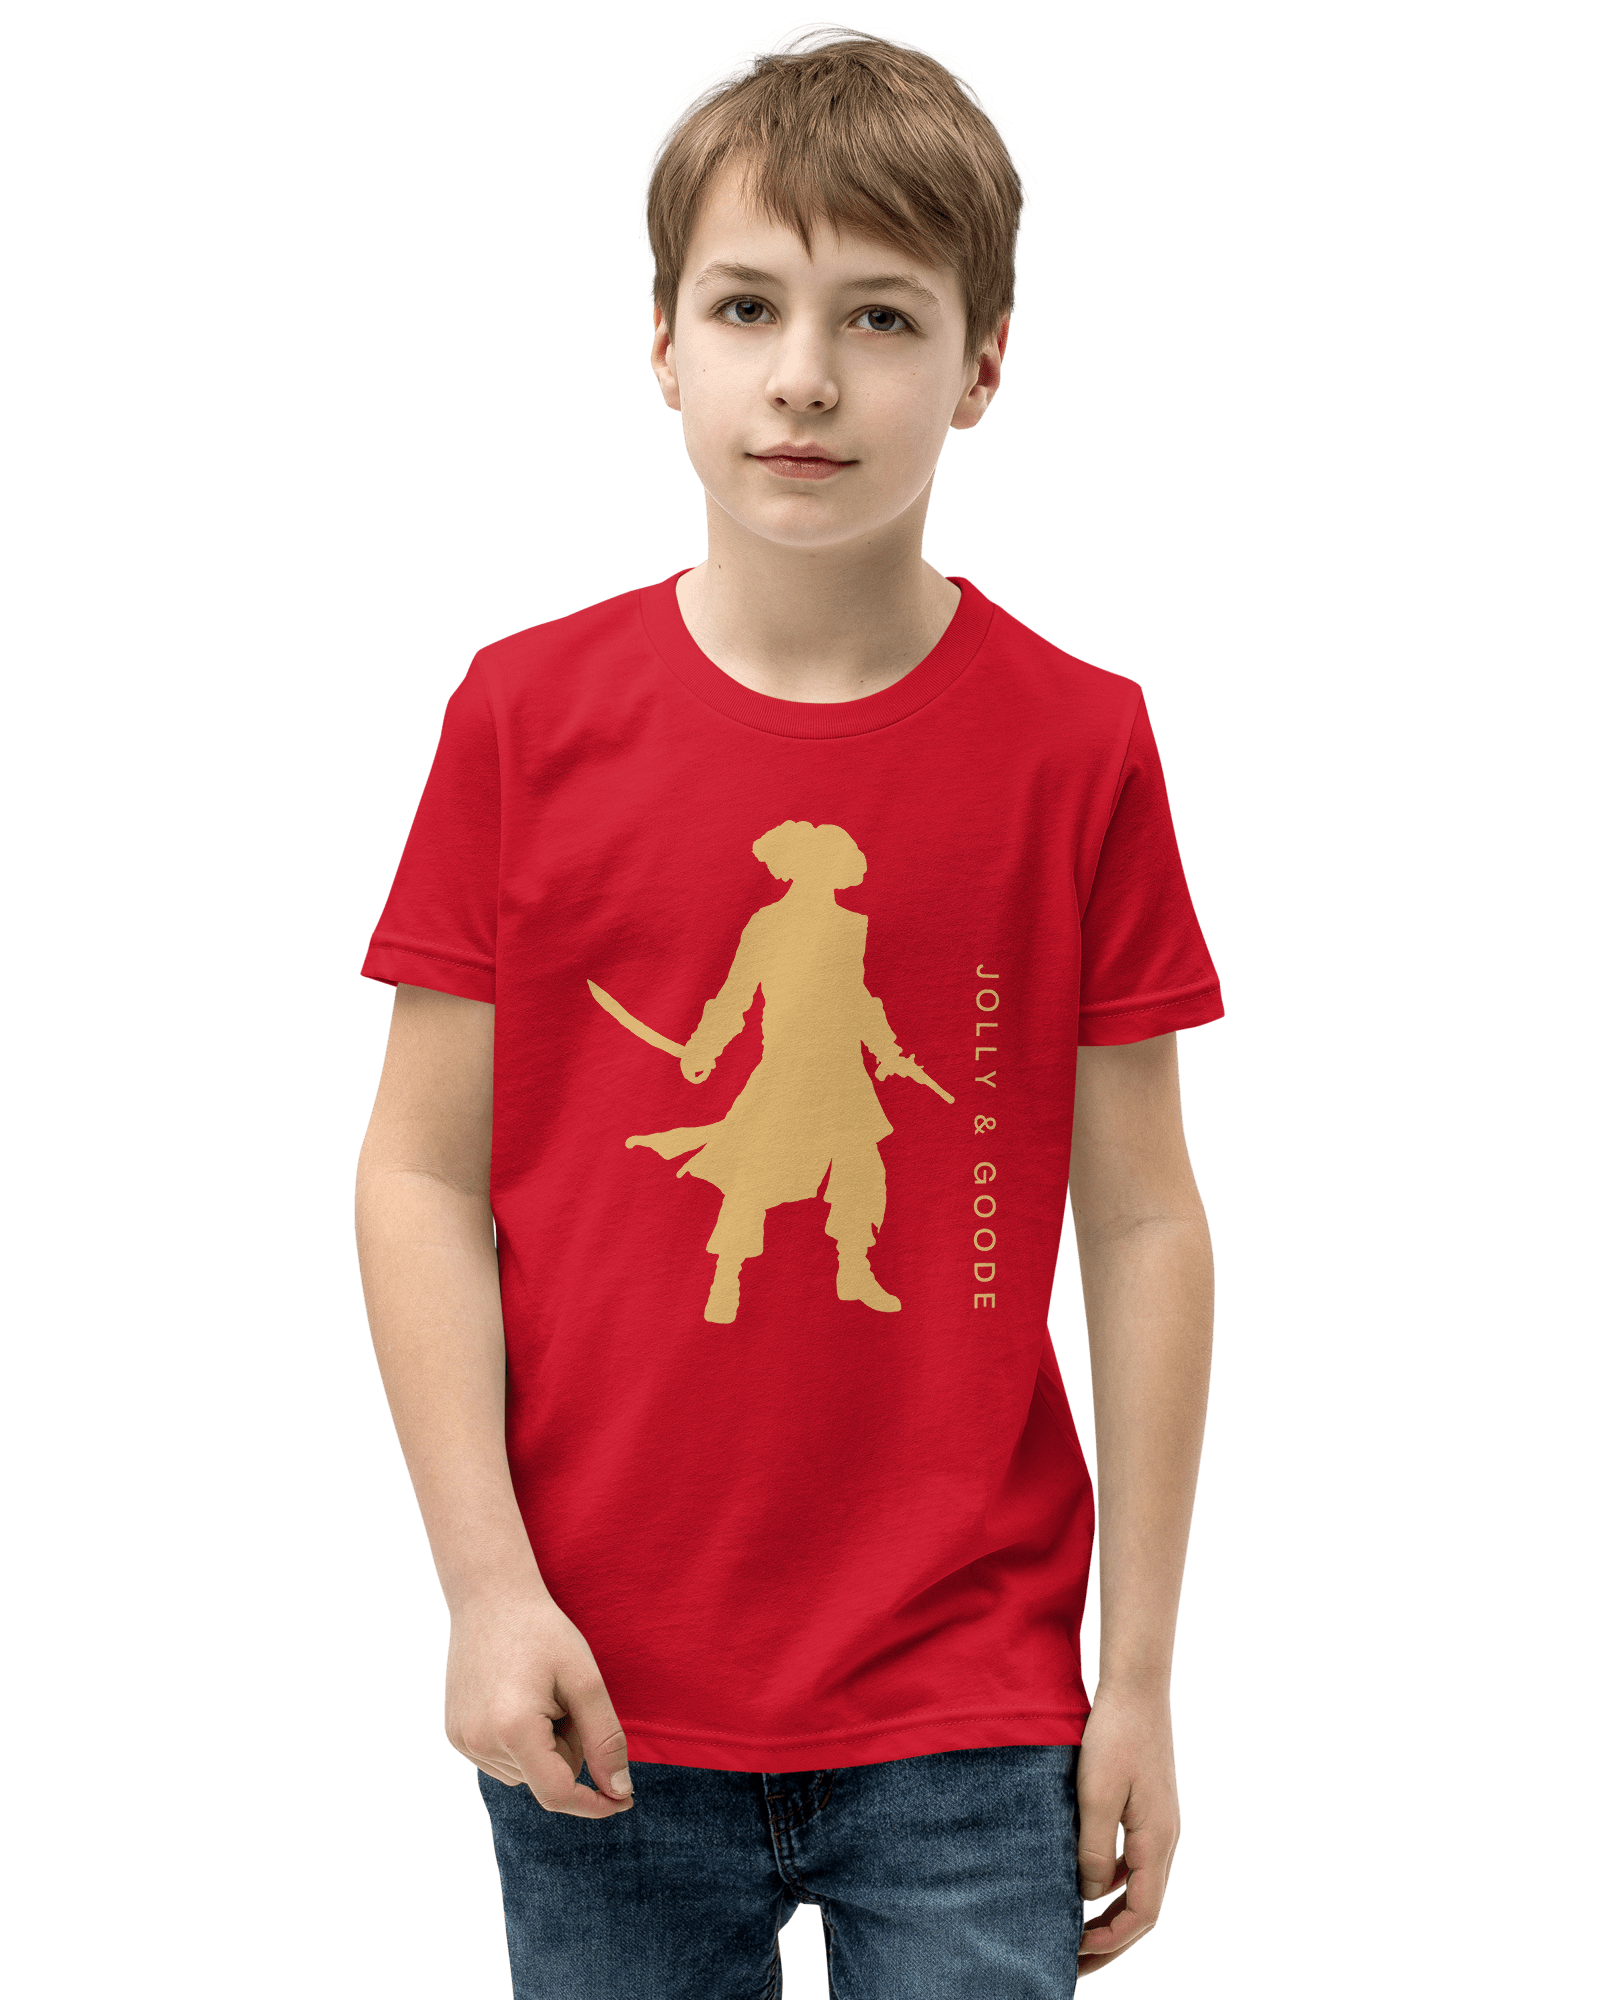 Jolly & Goode Pirate Silhouette Kids T-Shirt Red / S kids t-shirts Jolly & Goode